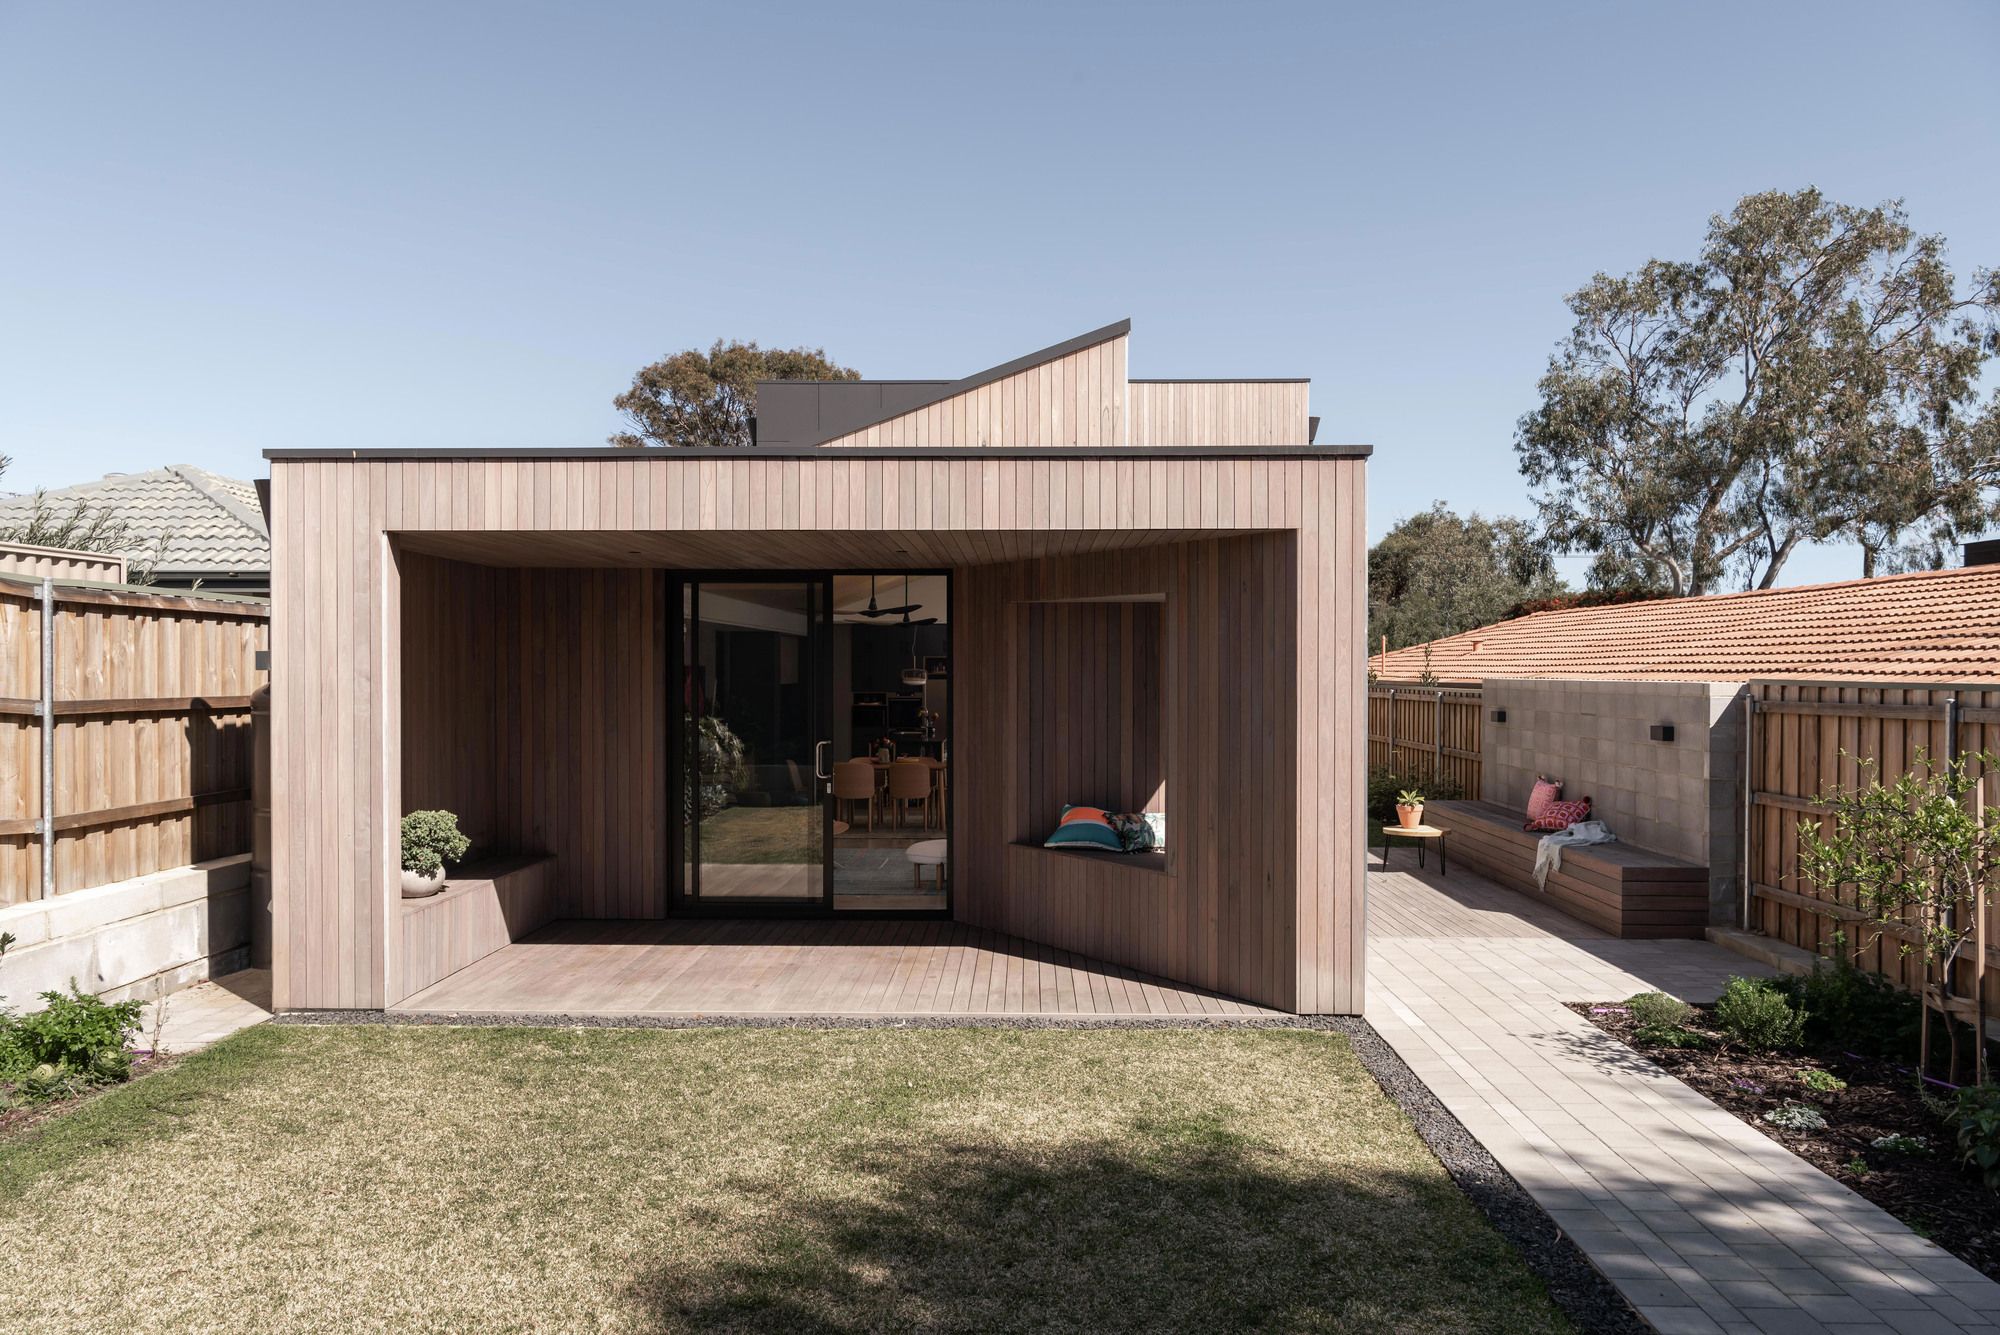 Mosman Park House by Robeson Architects showing rear elevation of the timber house